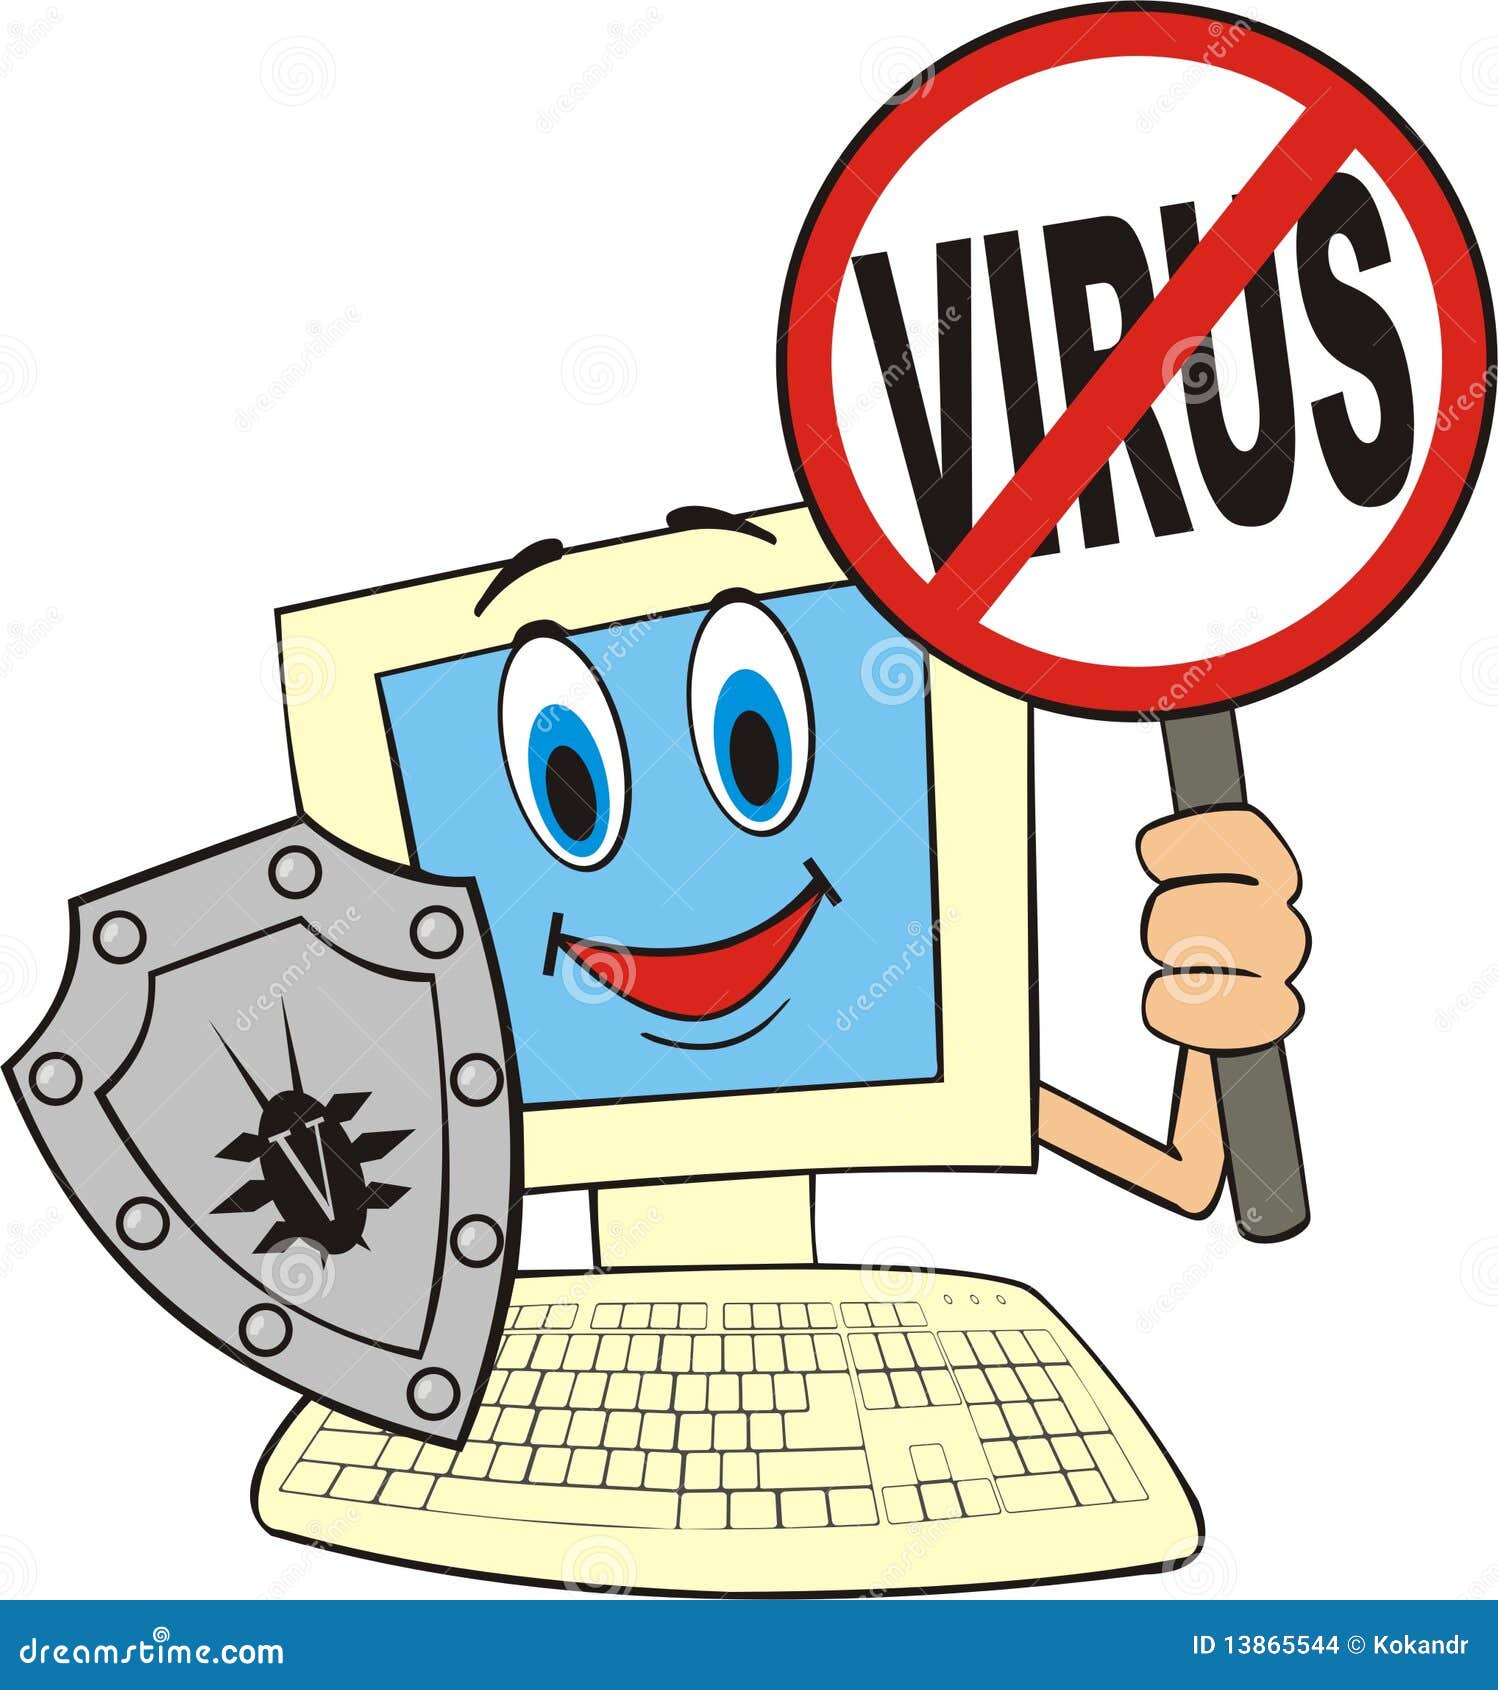 computer security clipart free - photo #38